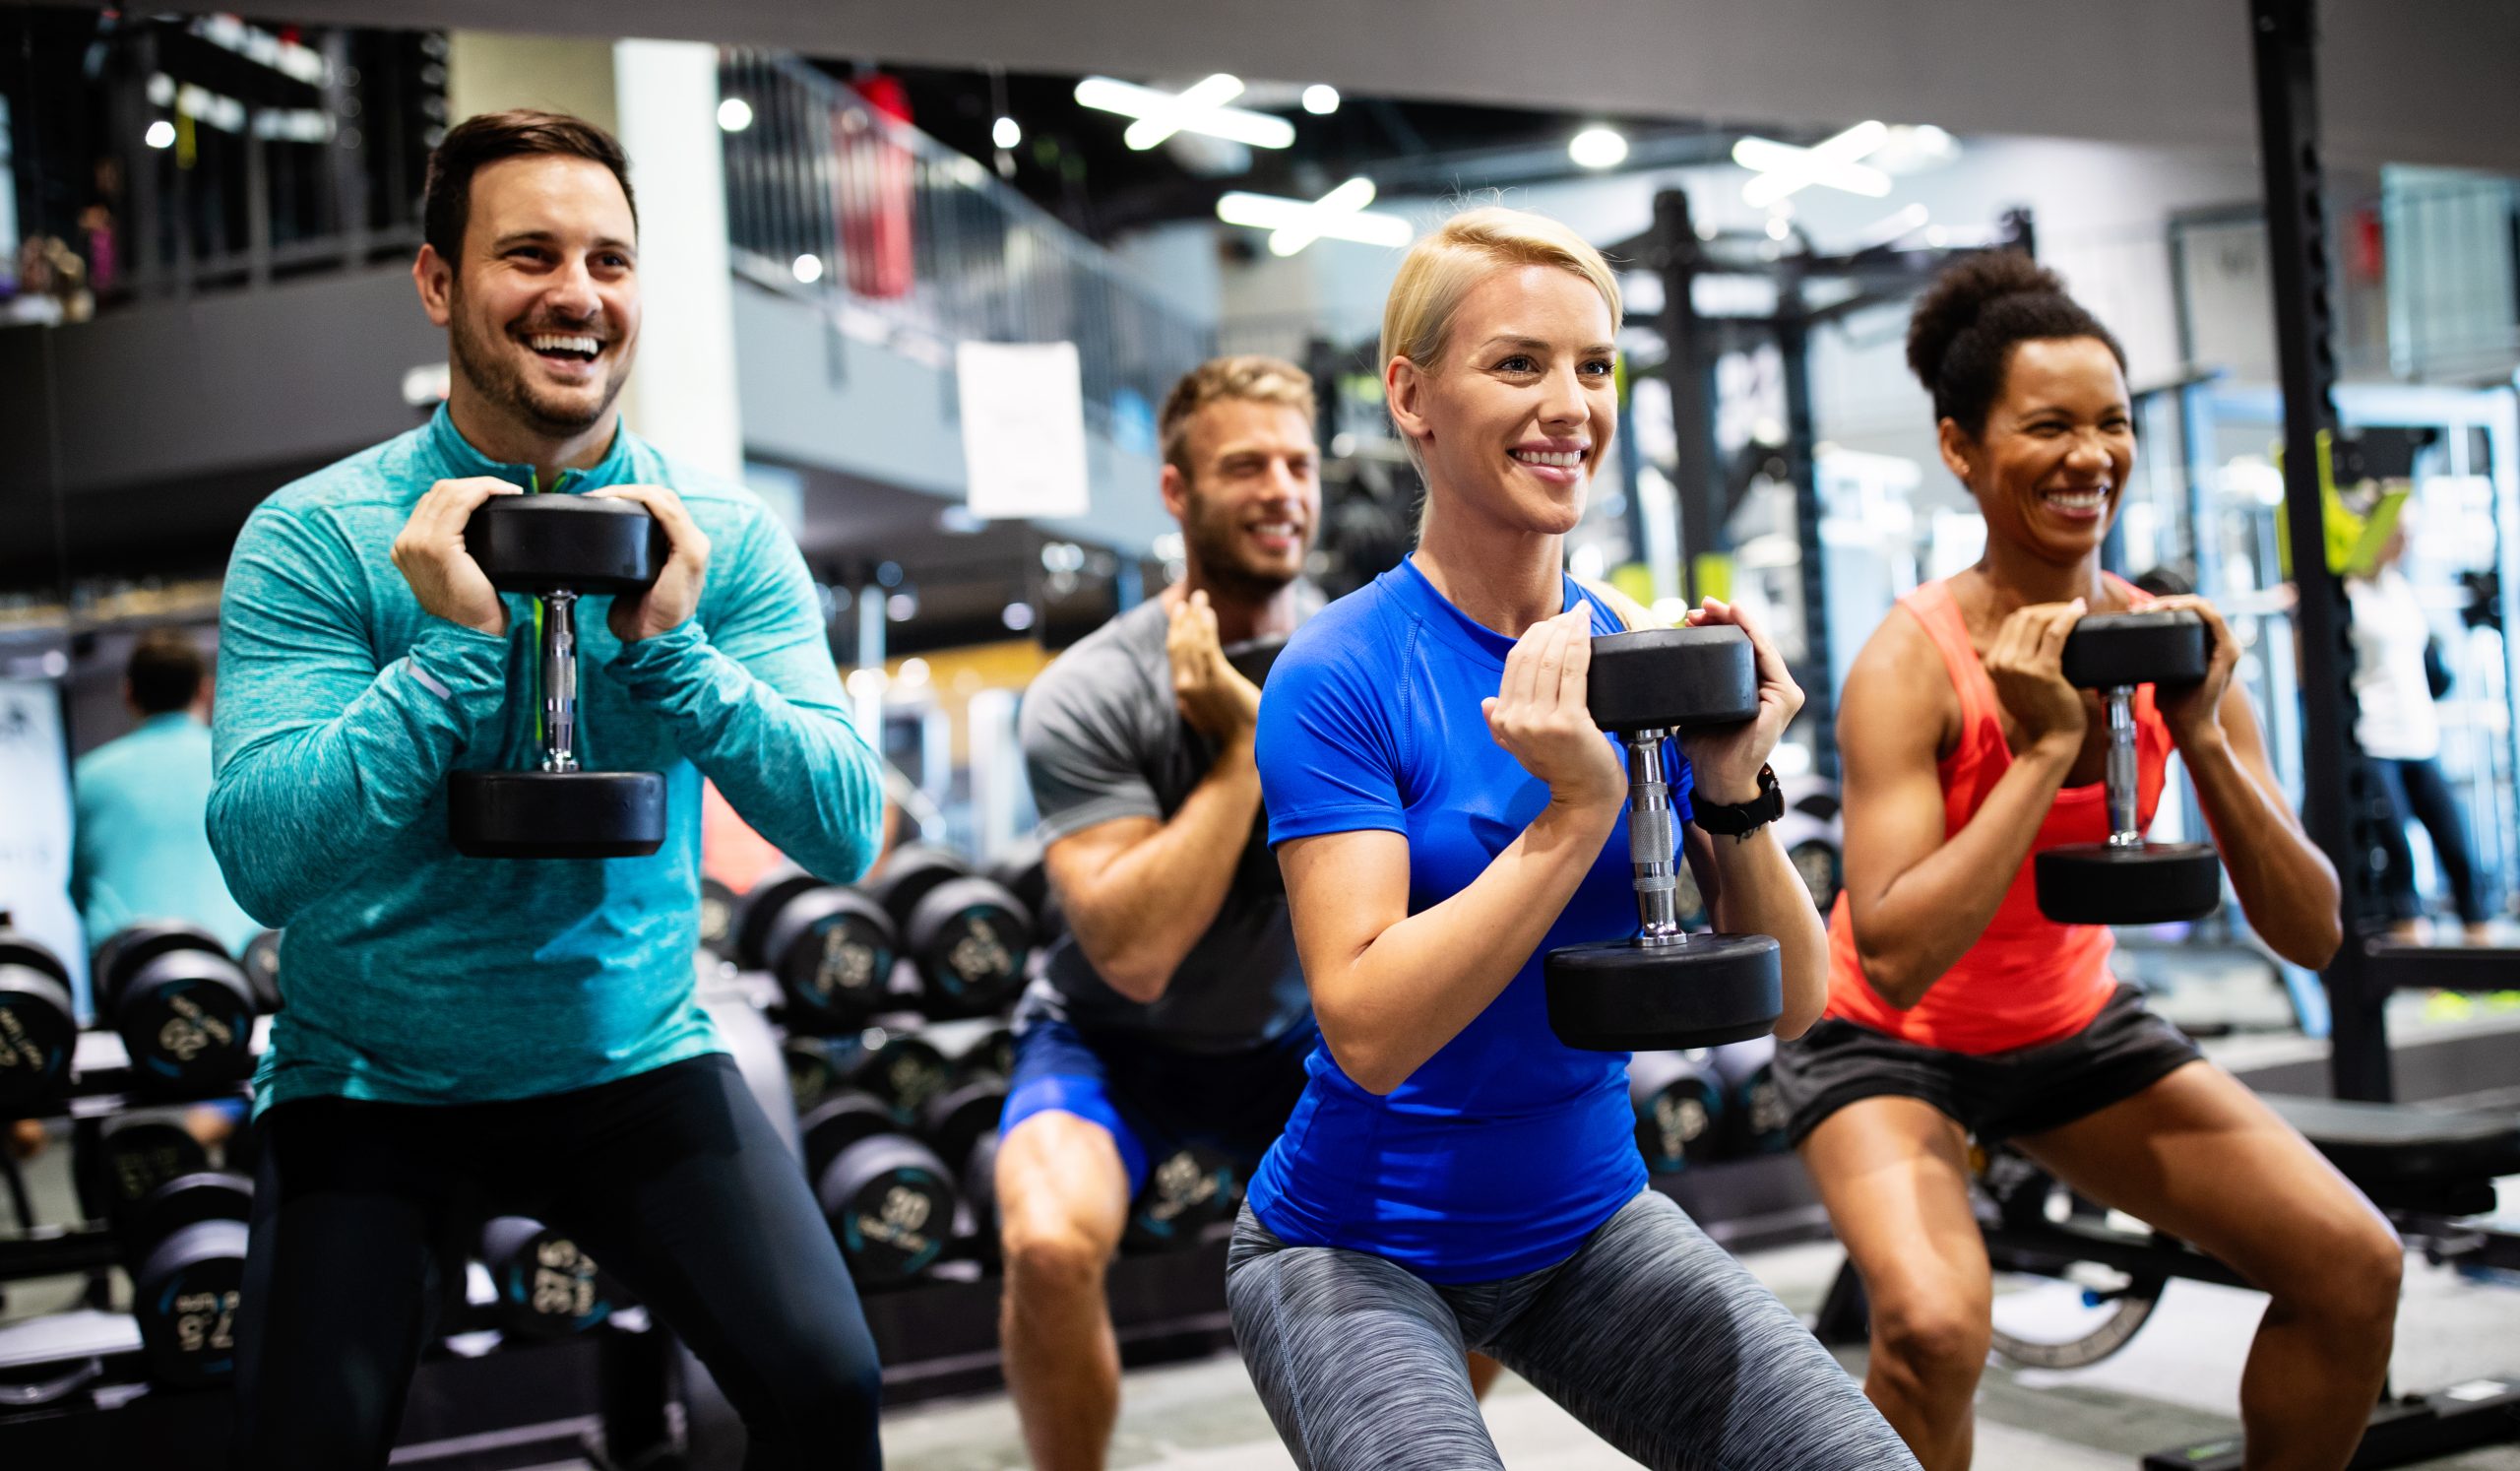 Private fitness operators report 10.2% growth in memberships since 2022 as ukactive and 4GLOBAL publish first Private Sector Benchmarking report